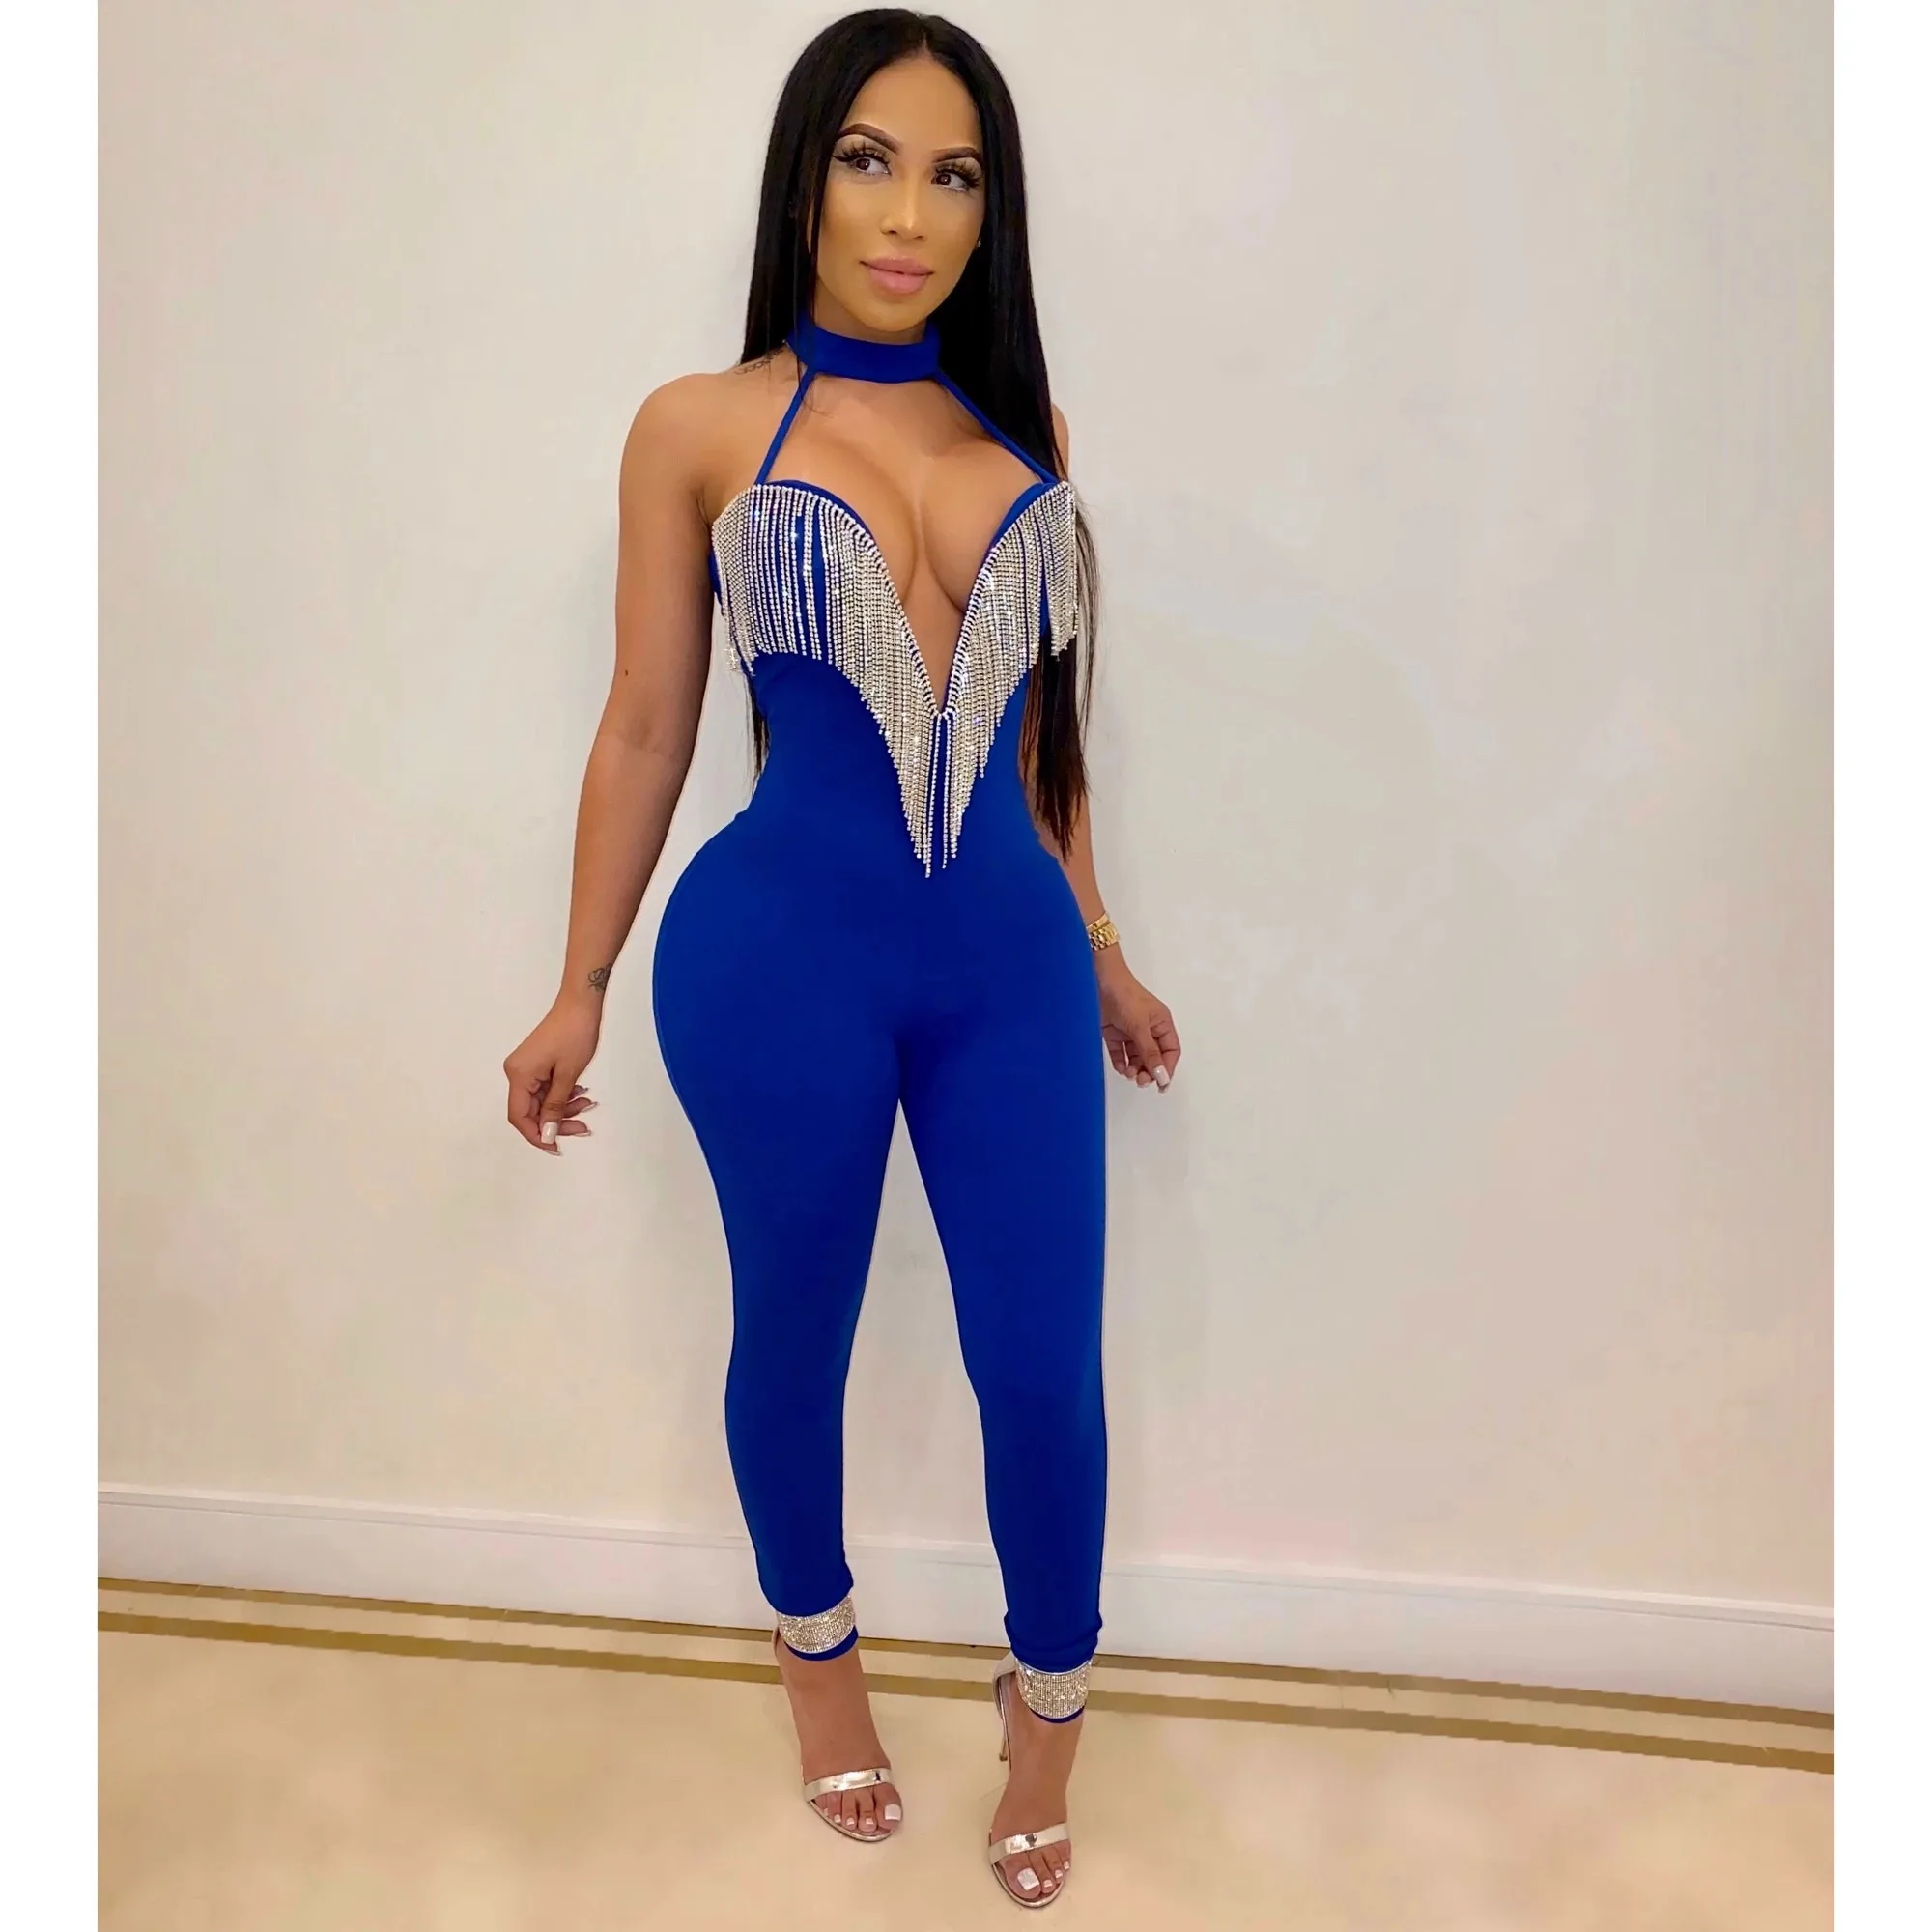 

Top Quality V-Neck Blingbling Sexy Jumpsuit Women Elegant Bandage Rayon Party Night Club